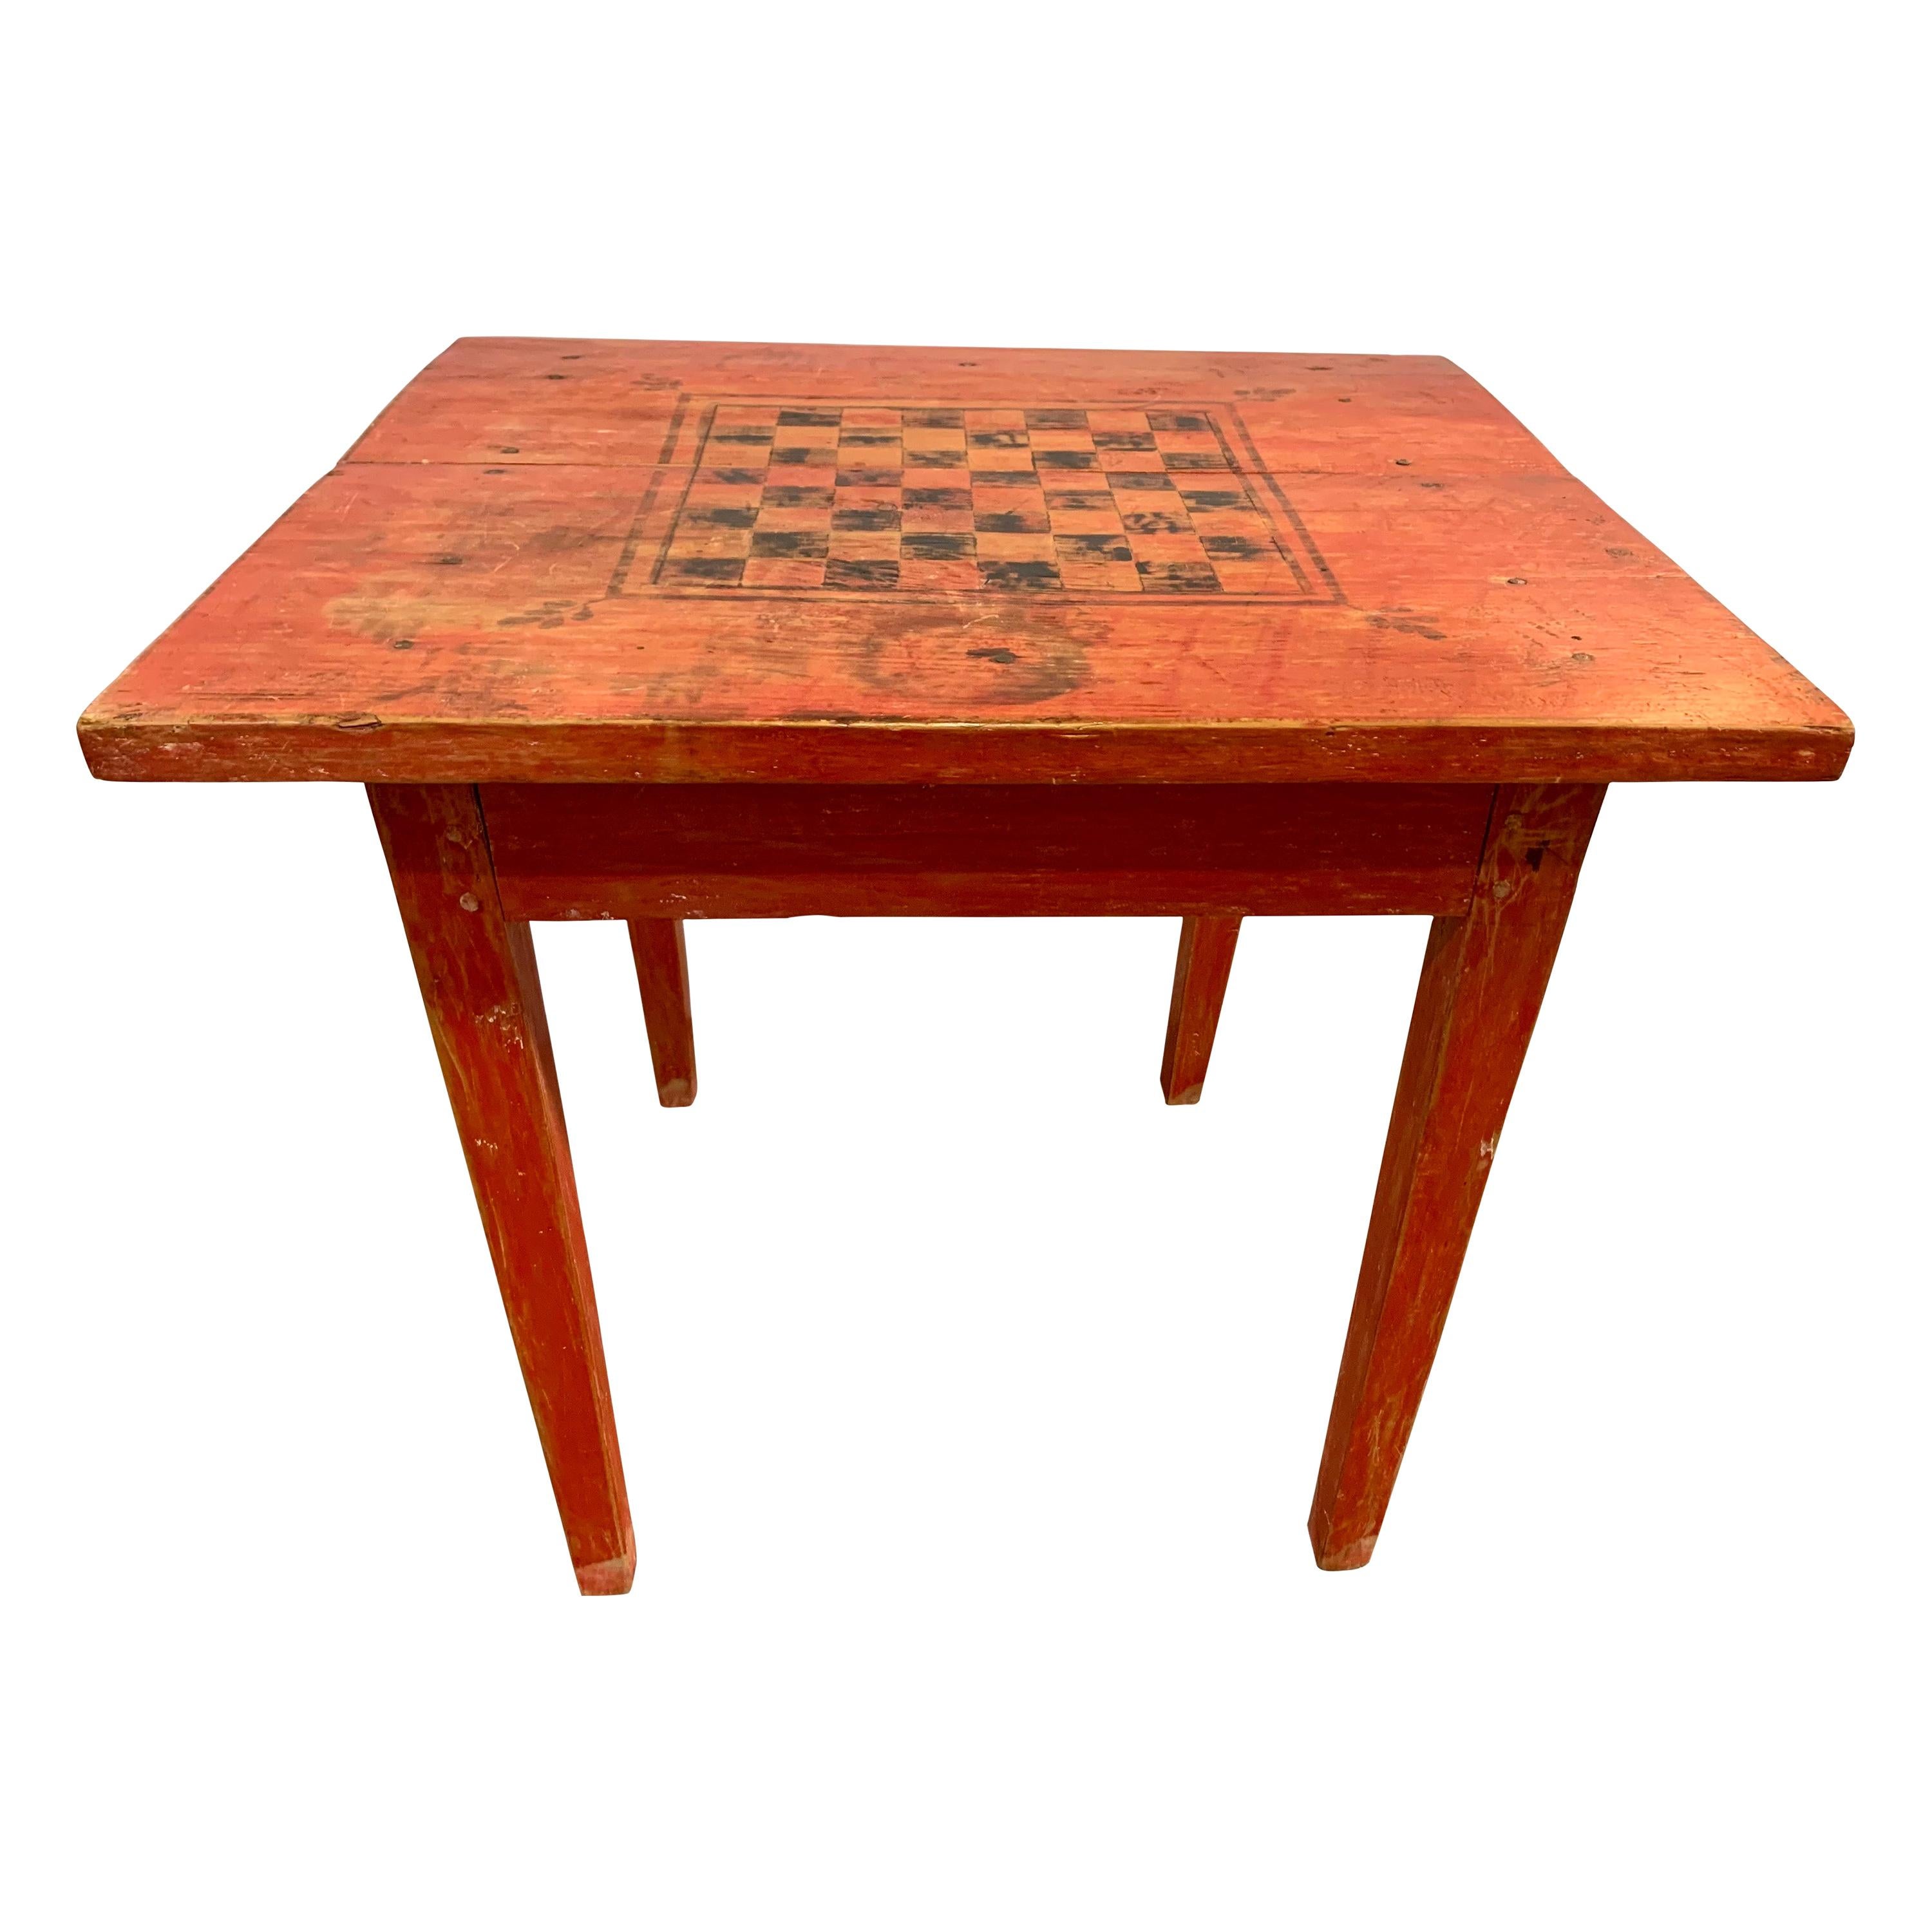 Antique 19th Century American Primitive Red Painted Game Table Chess